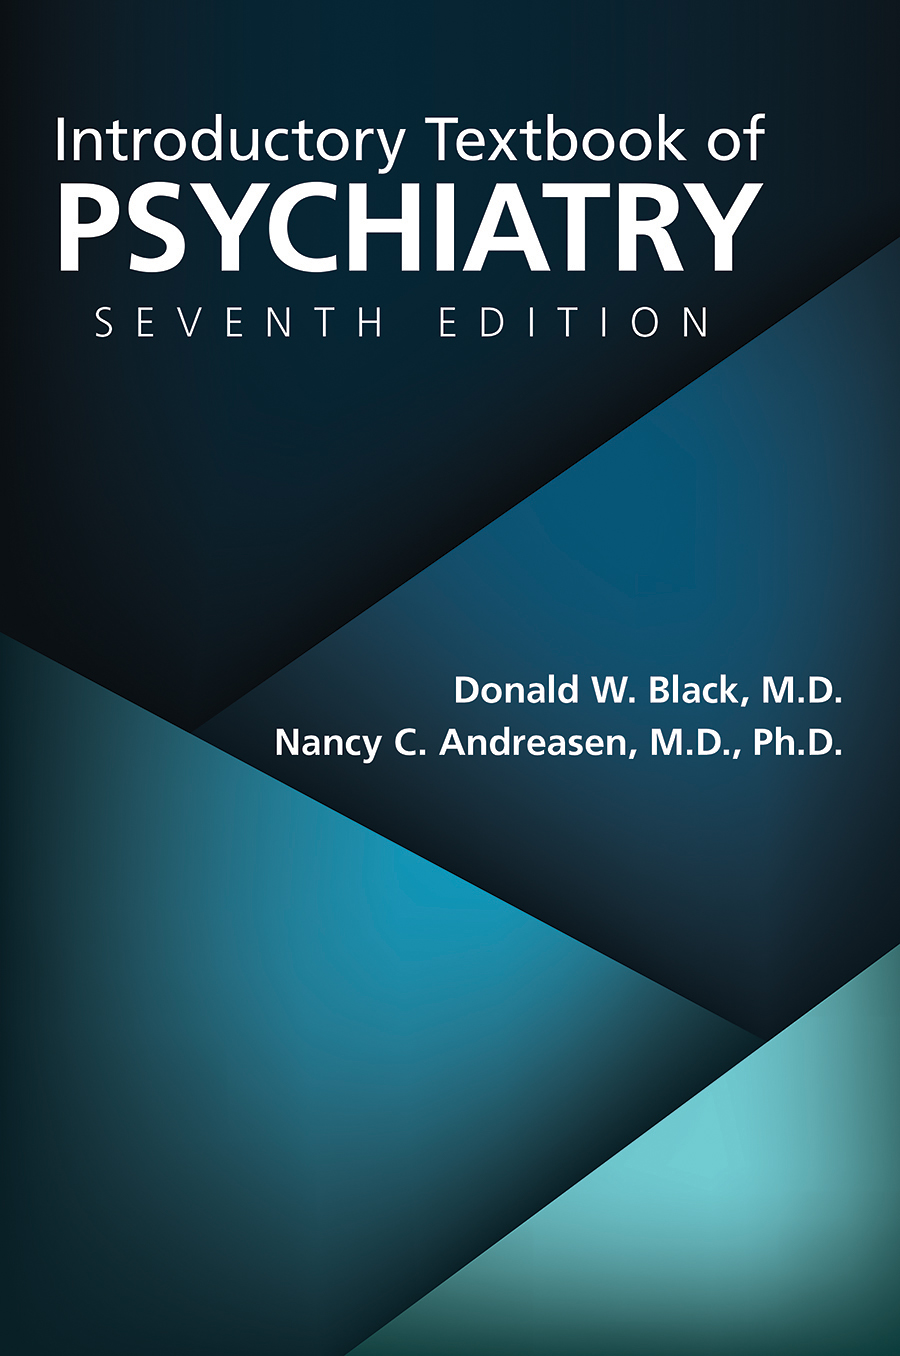 View Table of Contents for Introductory Textbook of Psychiatry